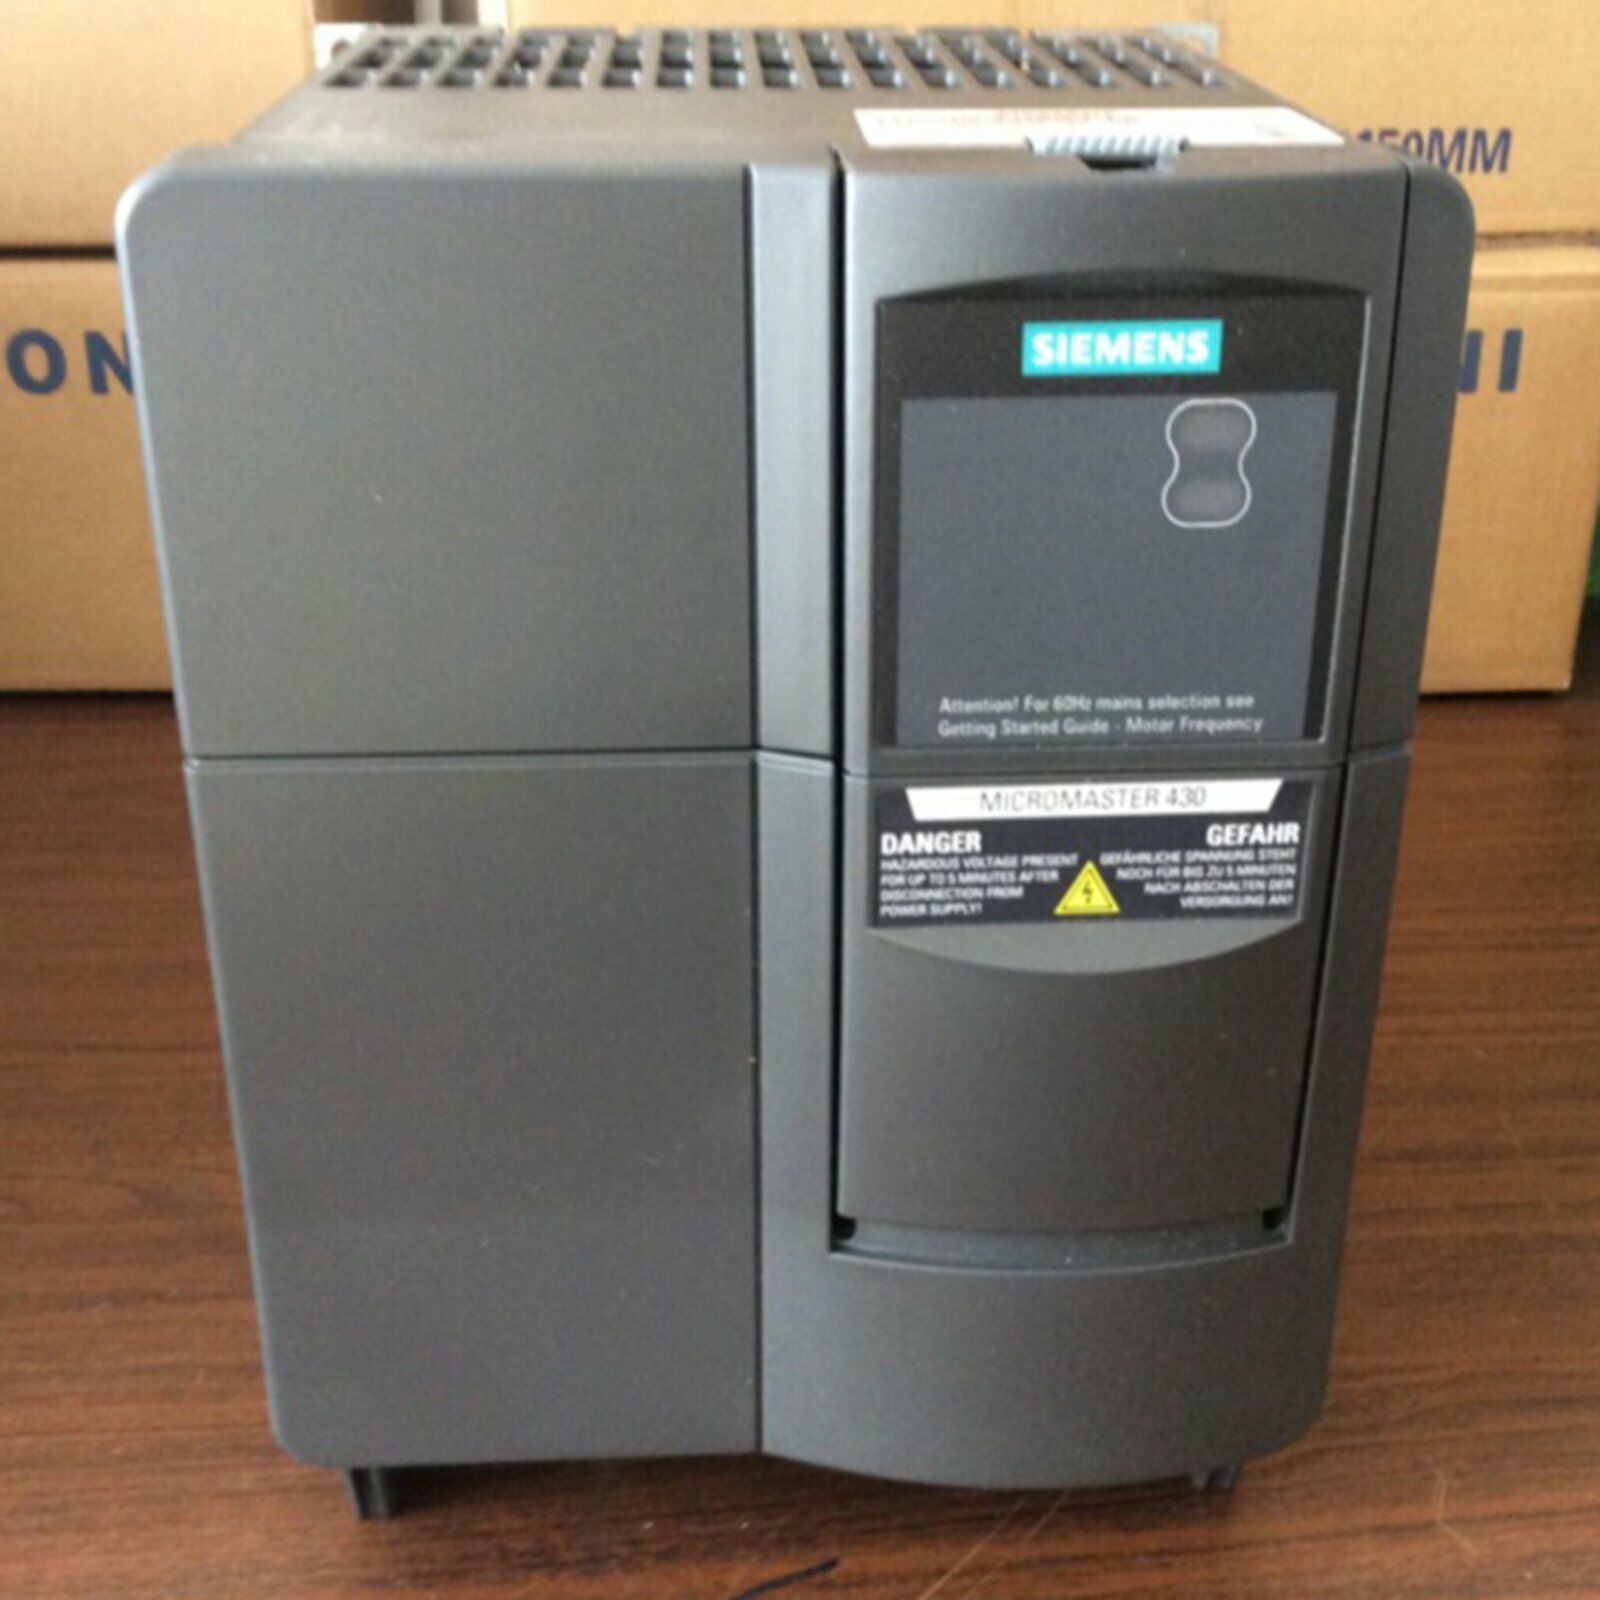 6SE6440-2UC33-7FA1 KOEED 500+, 90%, import_2020_10_10_031751, Other, Siemens